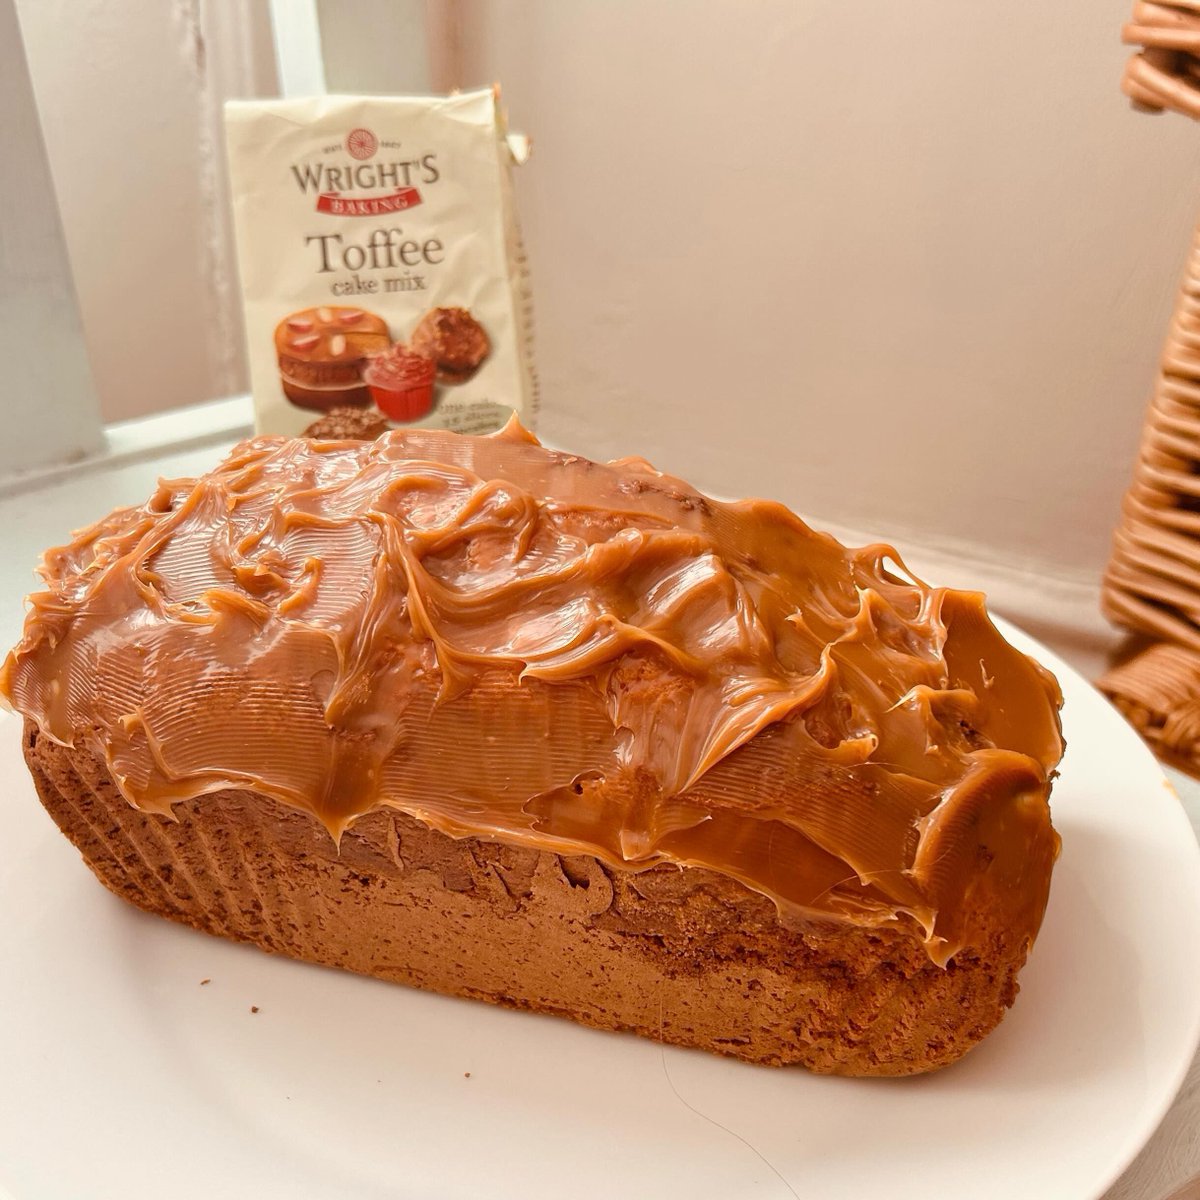 Some words of praise for our Toffee Cake Mix... 🌟 'This mix produces a light and moist cake with consistent results. There are real pieces of toffee in this. I add fudge pieces with mashed banana to make a banoffee-style cake.' 🌟 Availalbe in Tesco, Sainsbury's, and Waitrose.